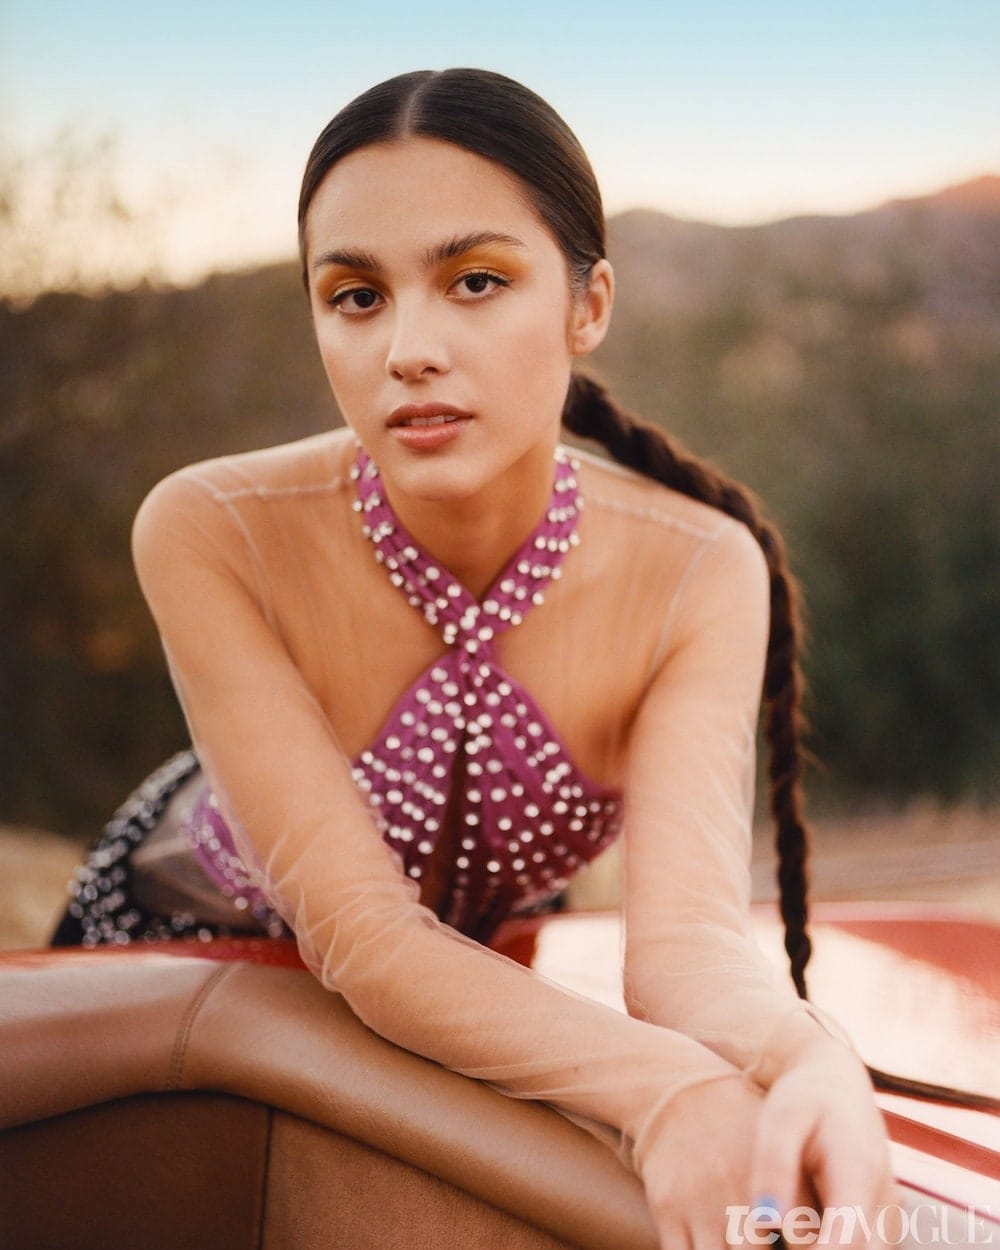 Olivia Rodrigo looked marvellous in Dsquared2 dress and boots in the photoshoot by Josefina Santos for Teen Vogue, October 2021 Edition.